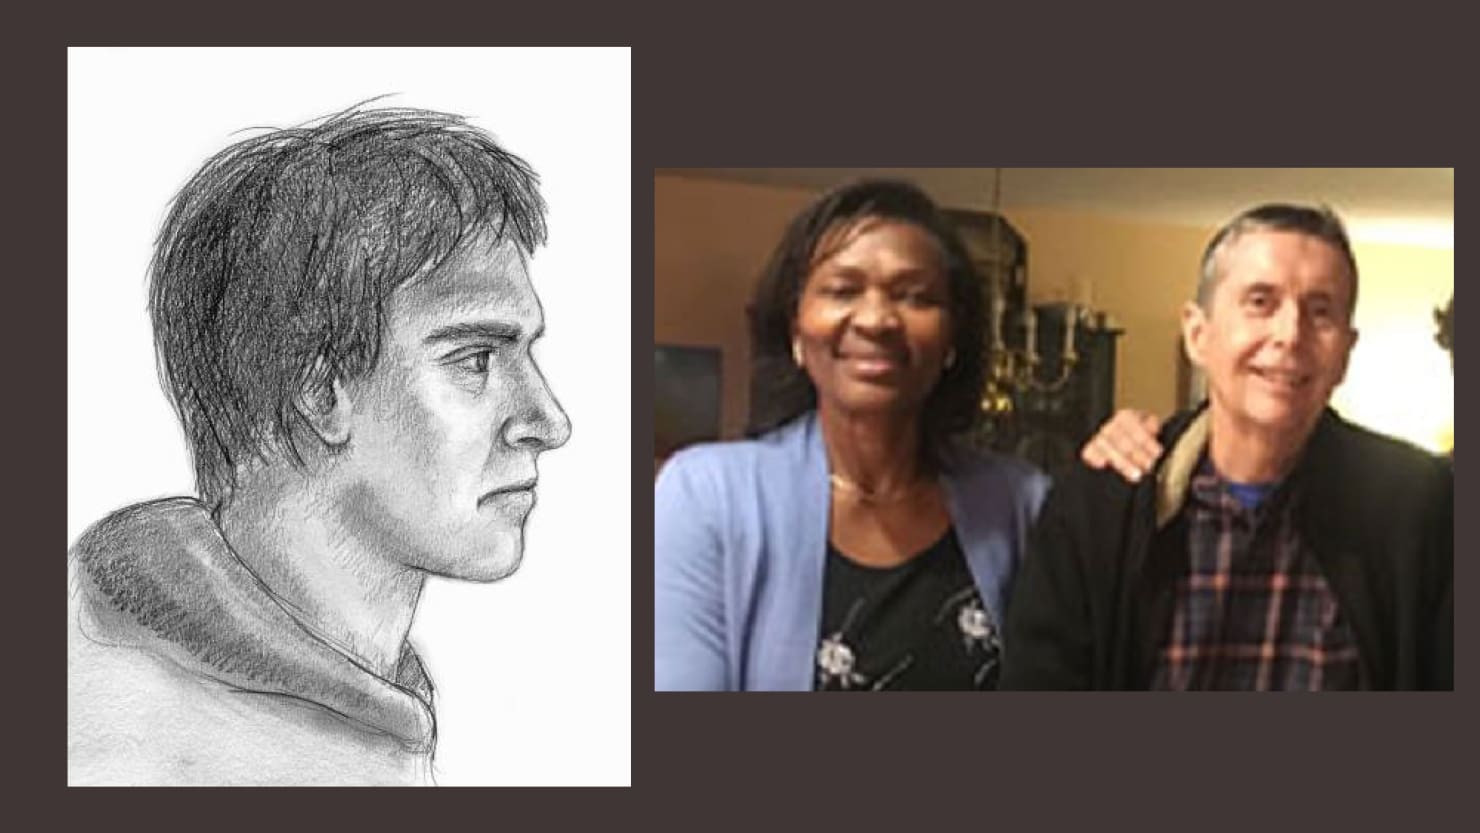 ‘Person of Interest’ Sketch Released in Mysterious Double Homicide of New Hampshire Couple on a Hike